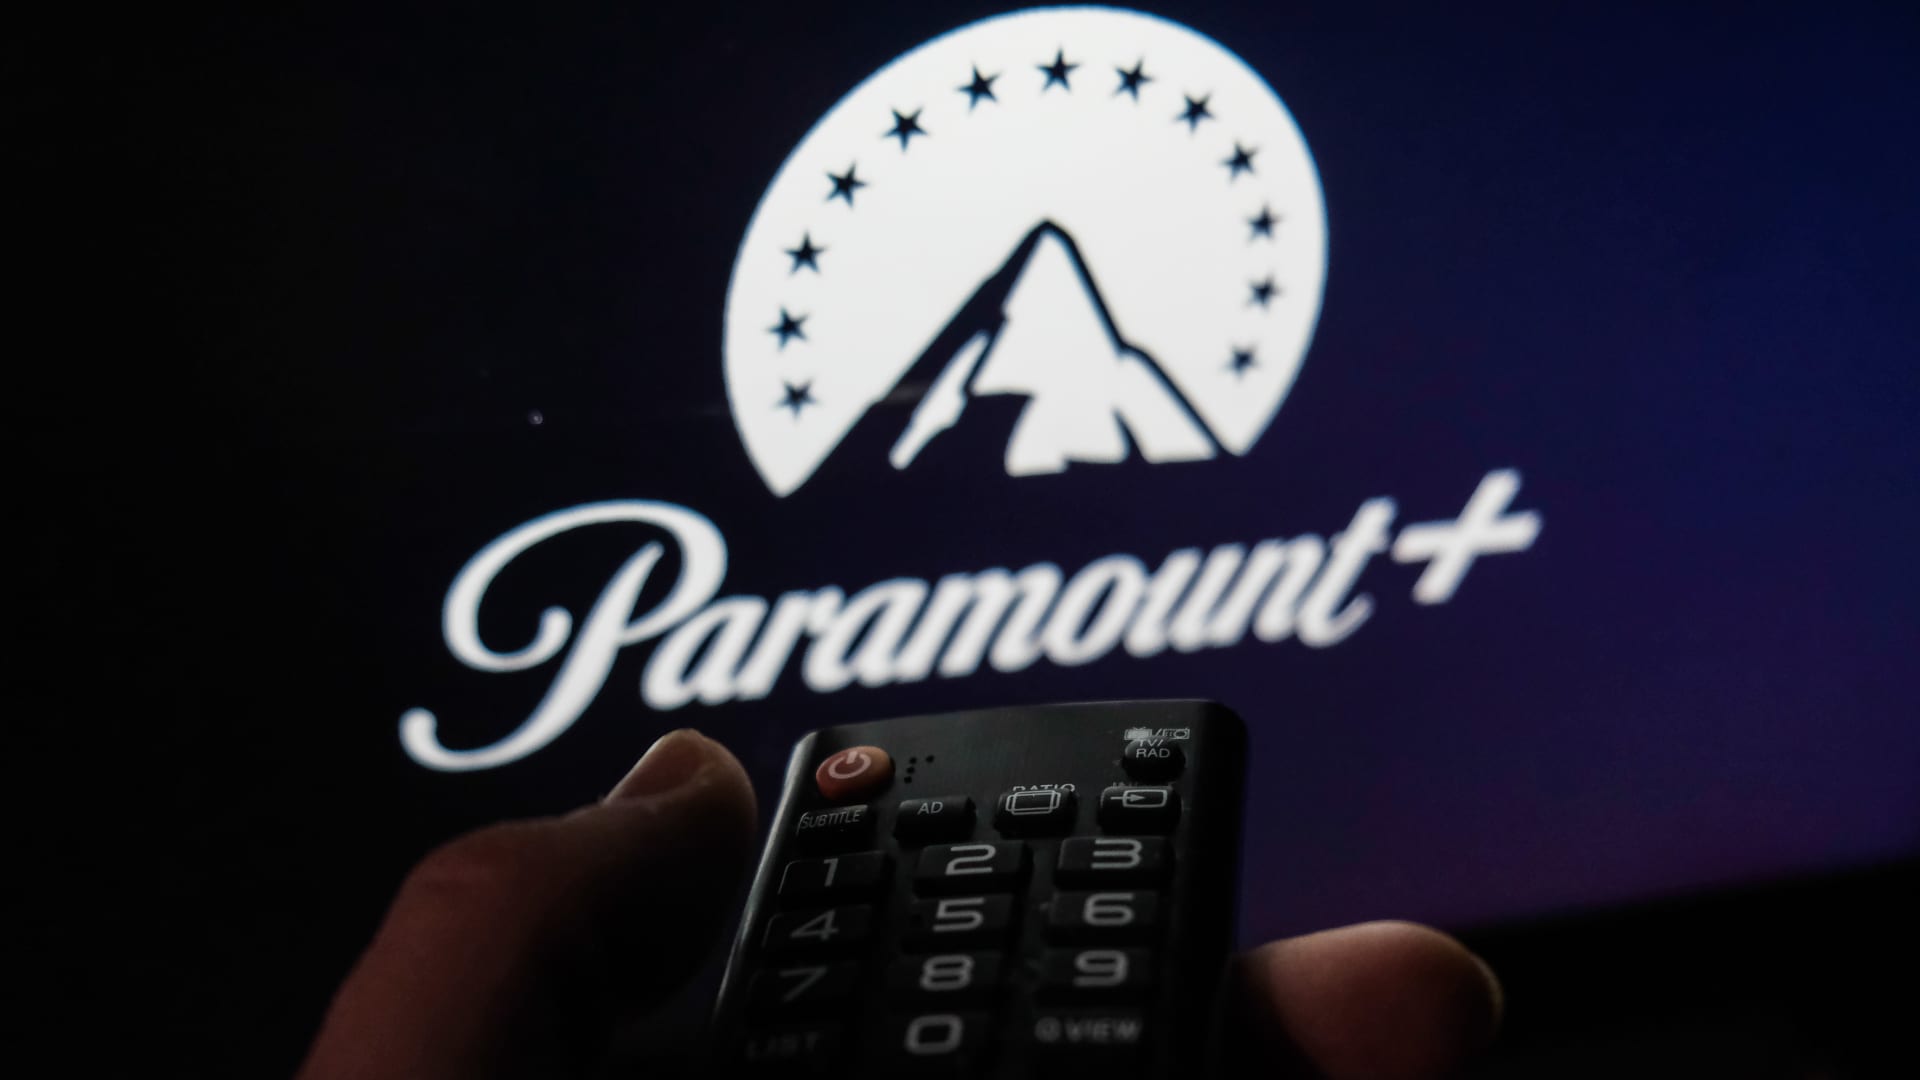 Media shares leap after report says Apple, Paramount are discussing streaming bundle – जगत न्यूज